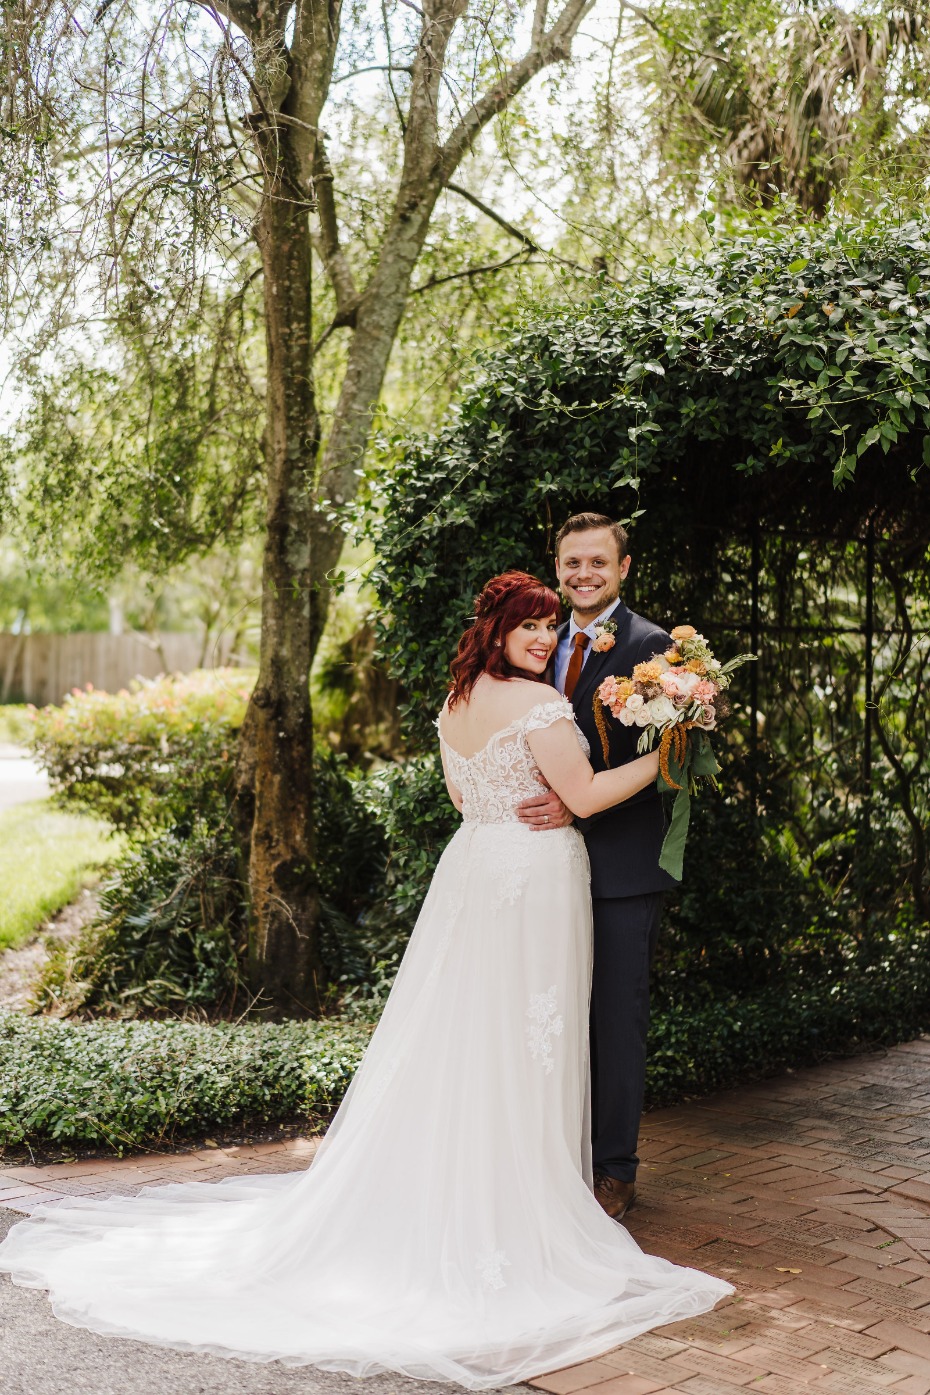 This Charming Garden Wedding Look Like It Jumped Off The Pages Of Your Favorite Jane Austin Novel